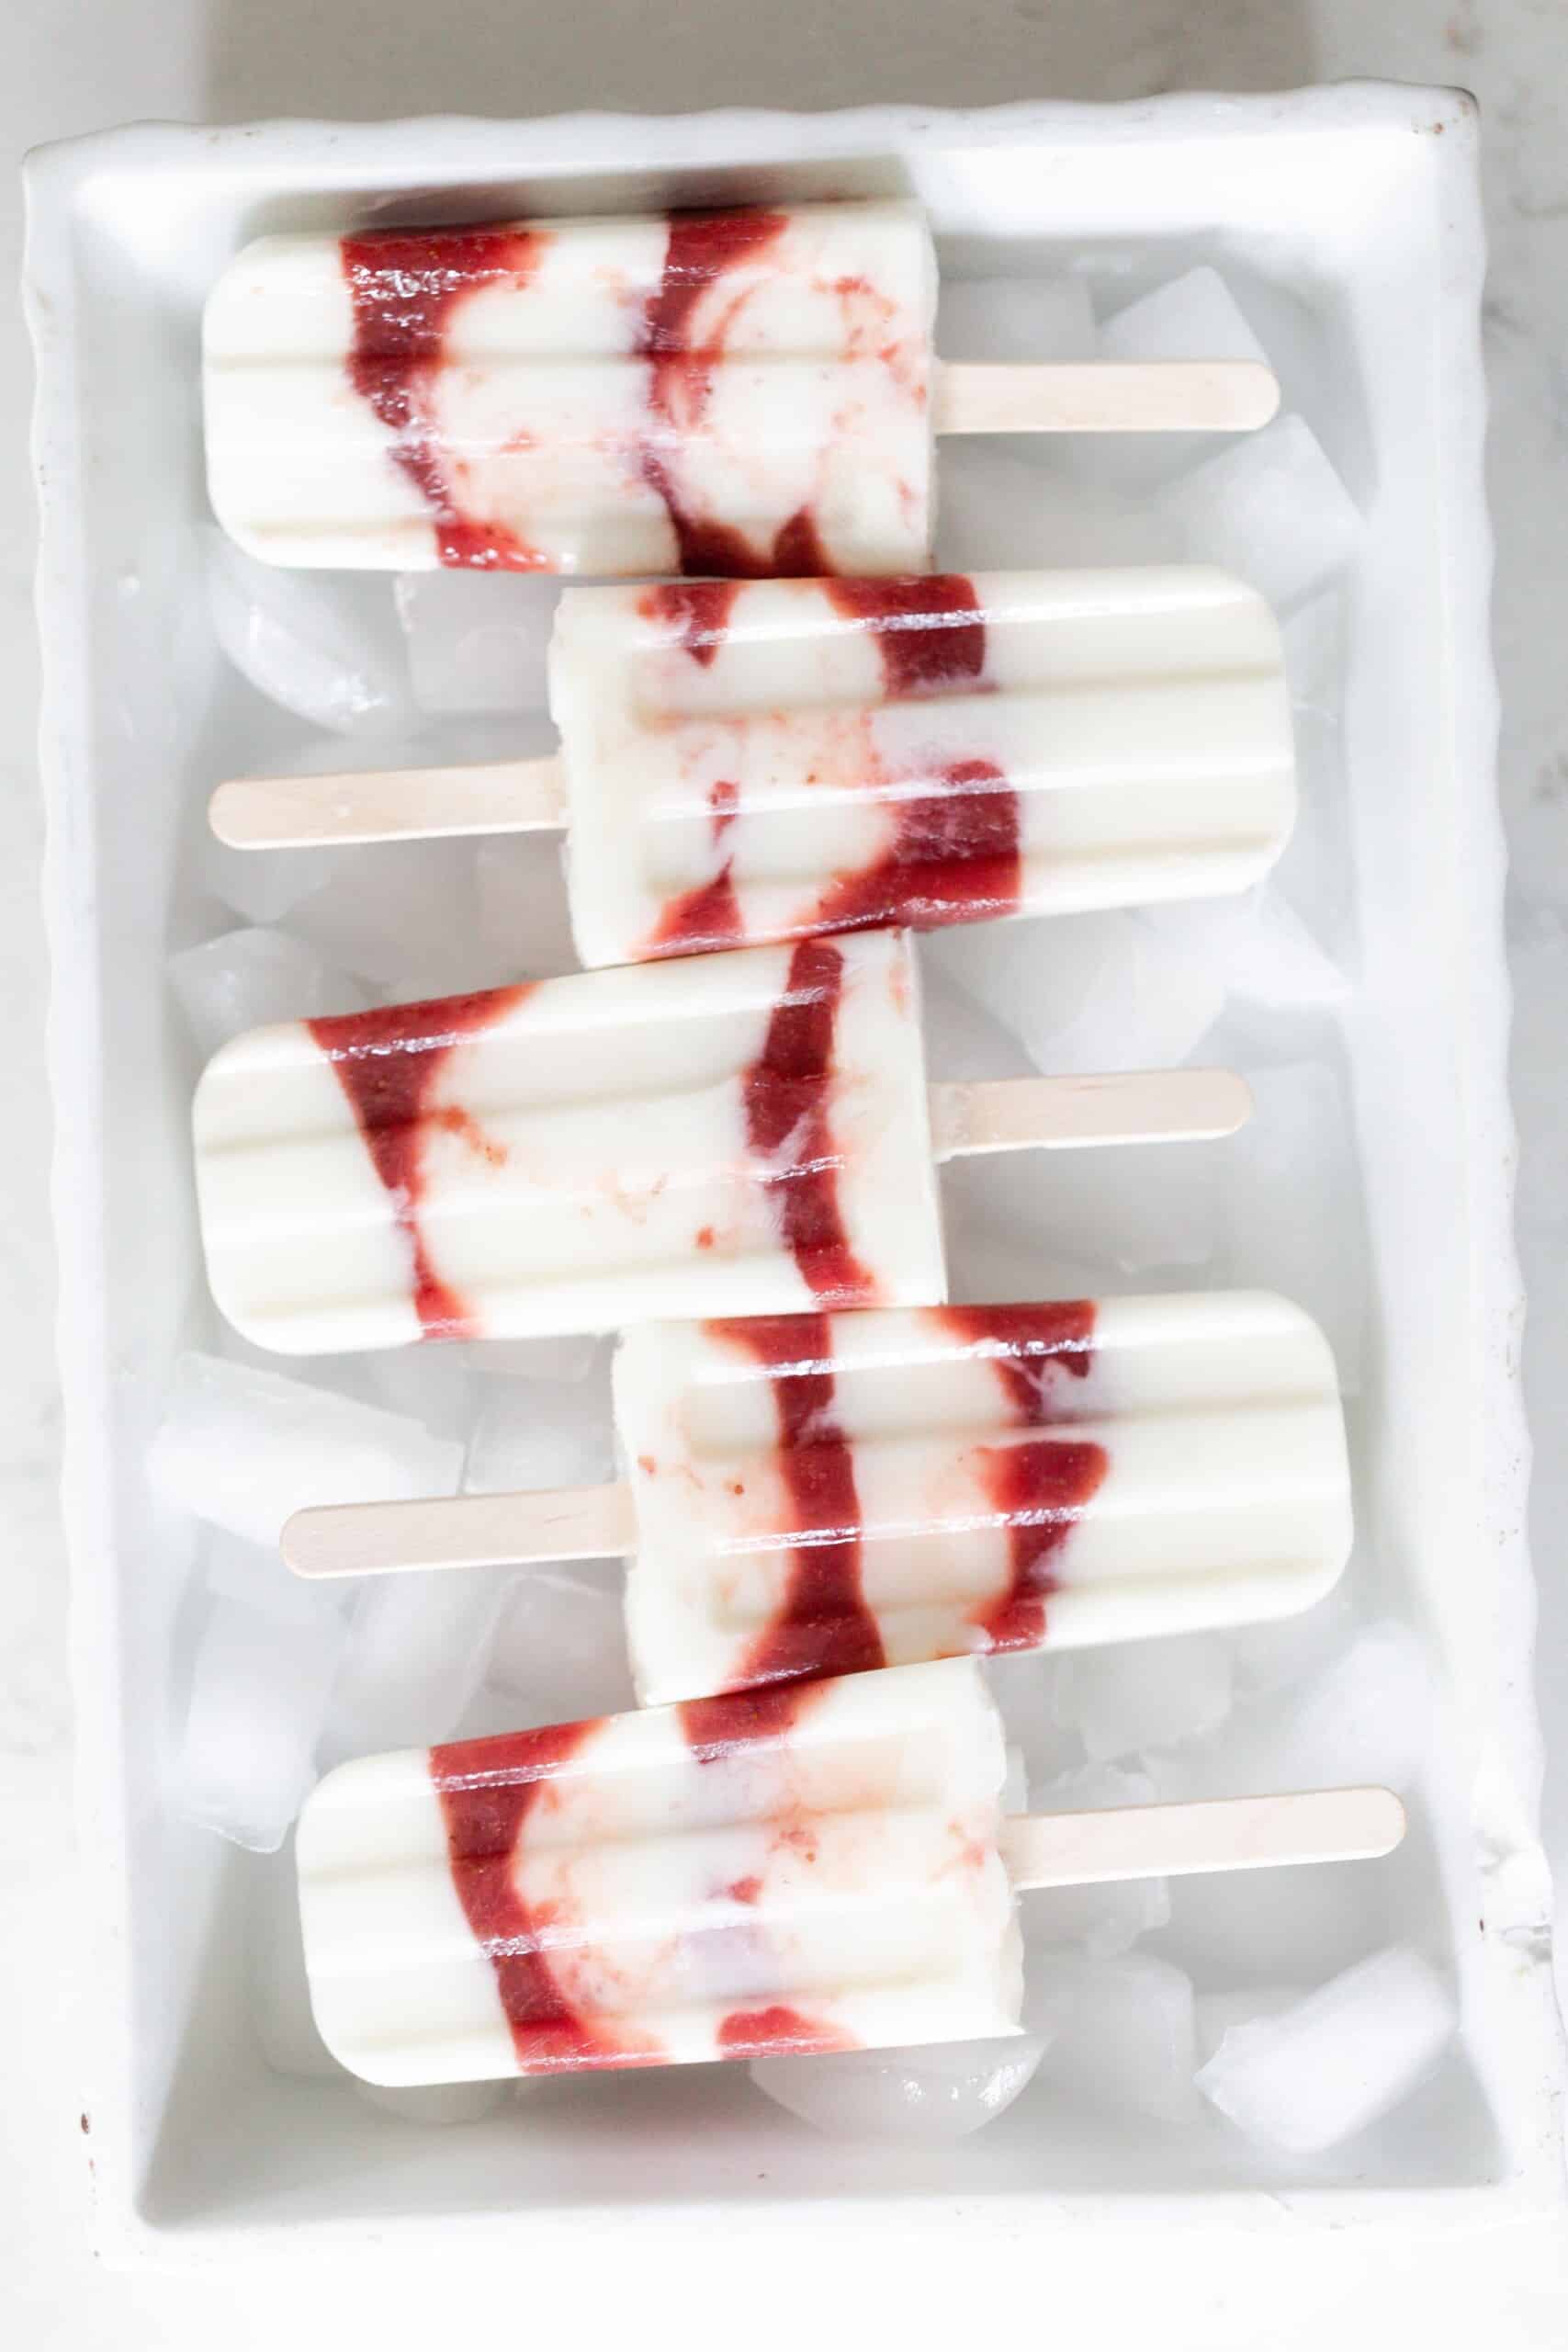 five strawberry yogurt popsicles laying on top of ice cubes in a white dish